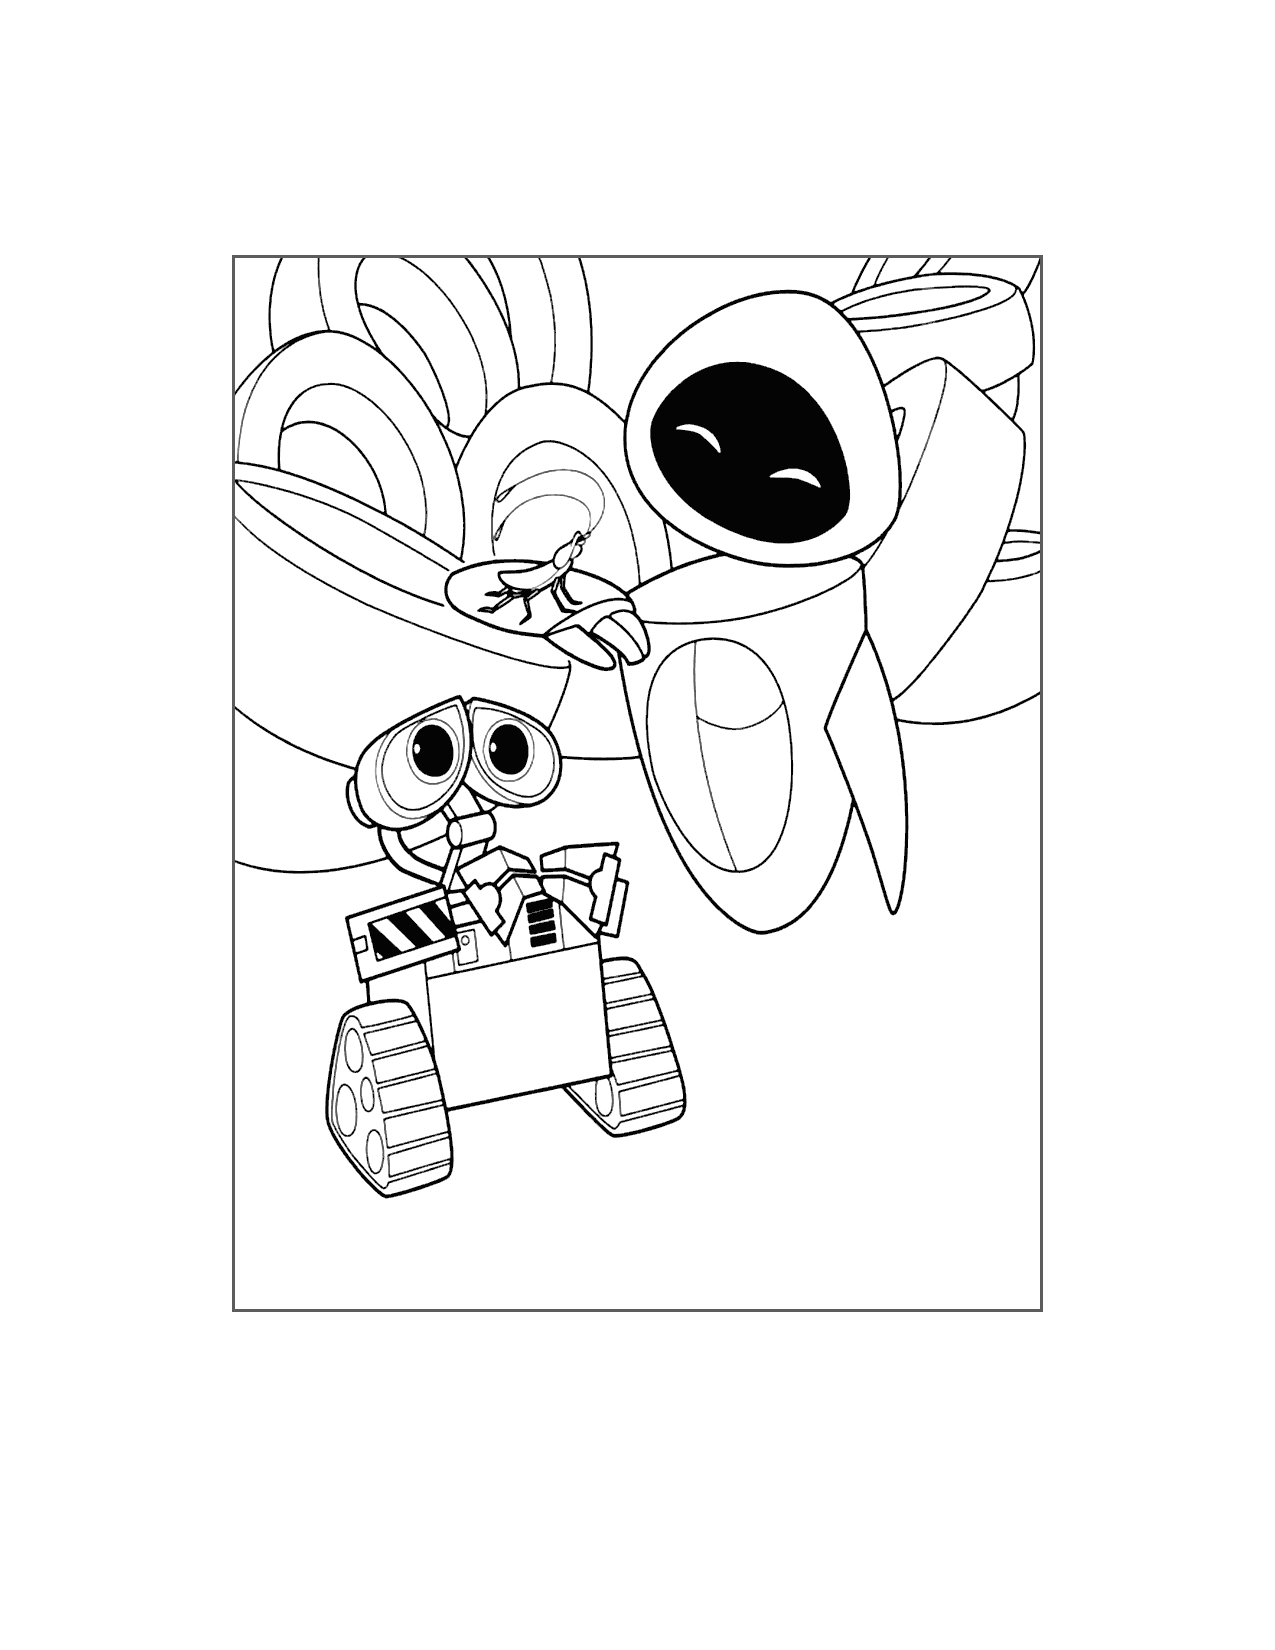 Eve Meets Hal The Roach Wall E Coloring Page